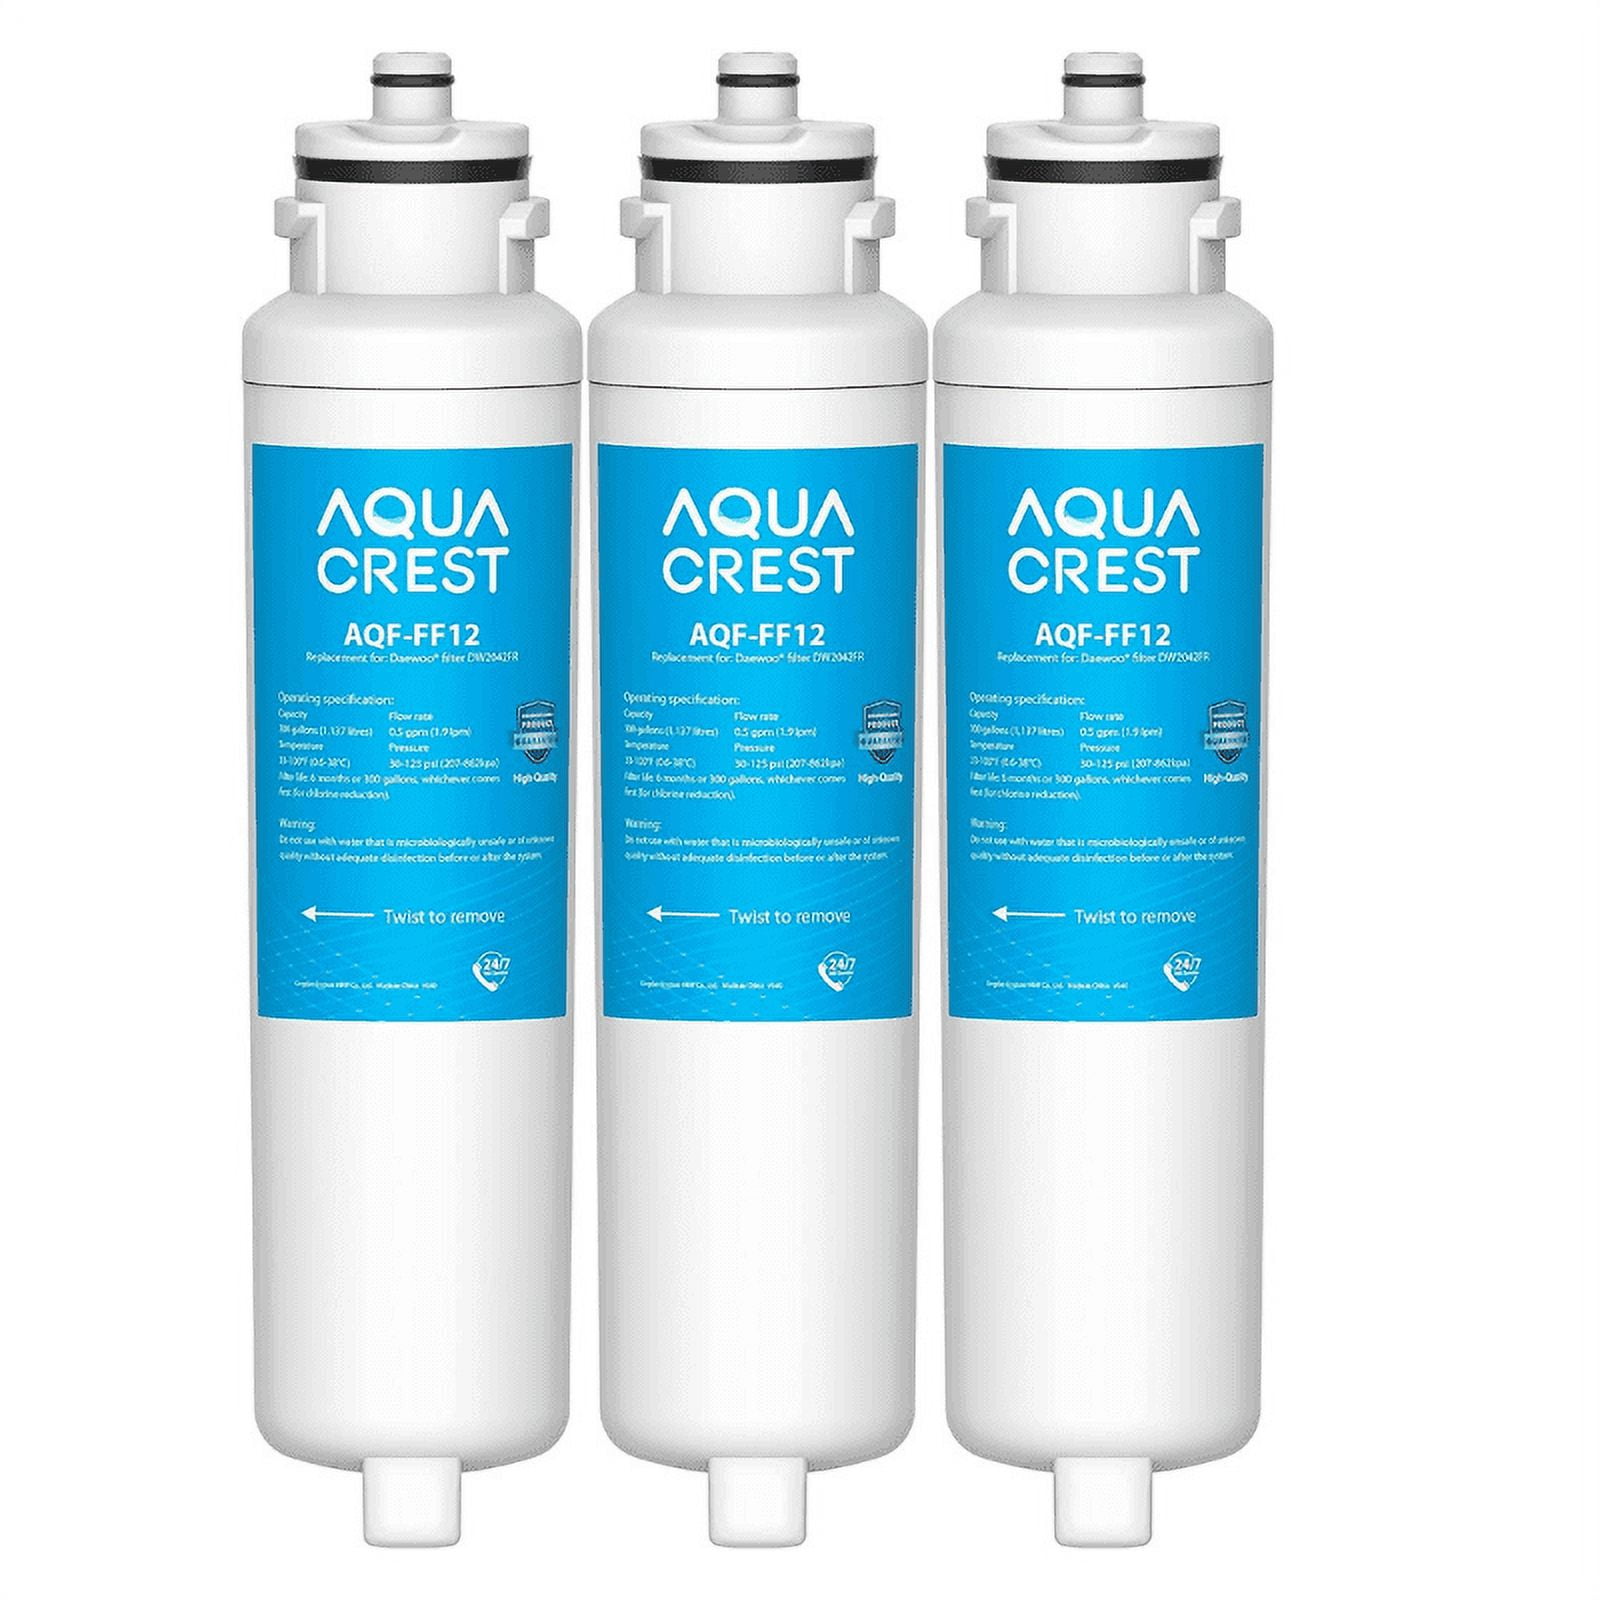 AQUA CREST DW2042FR-09 Refrigerator Water Filter, Replacement for ...